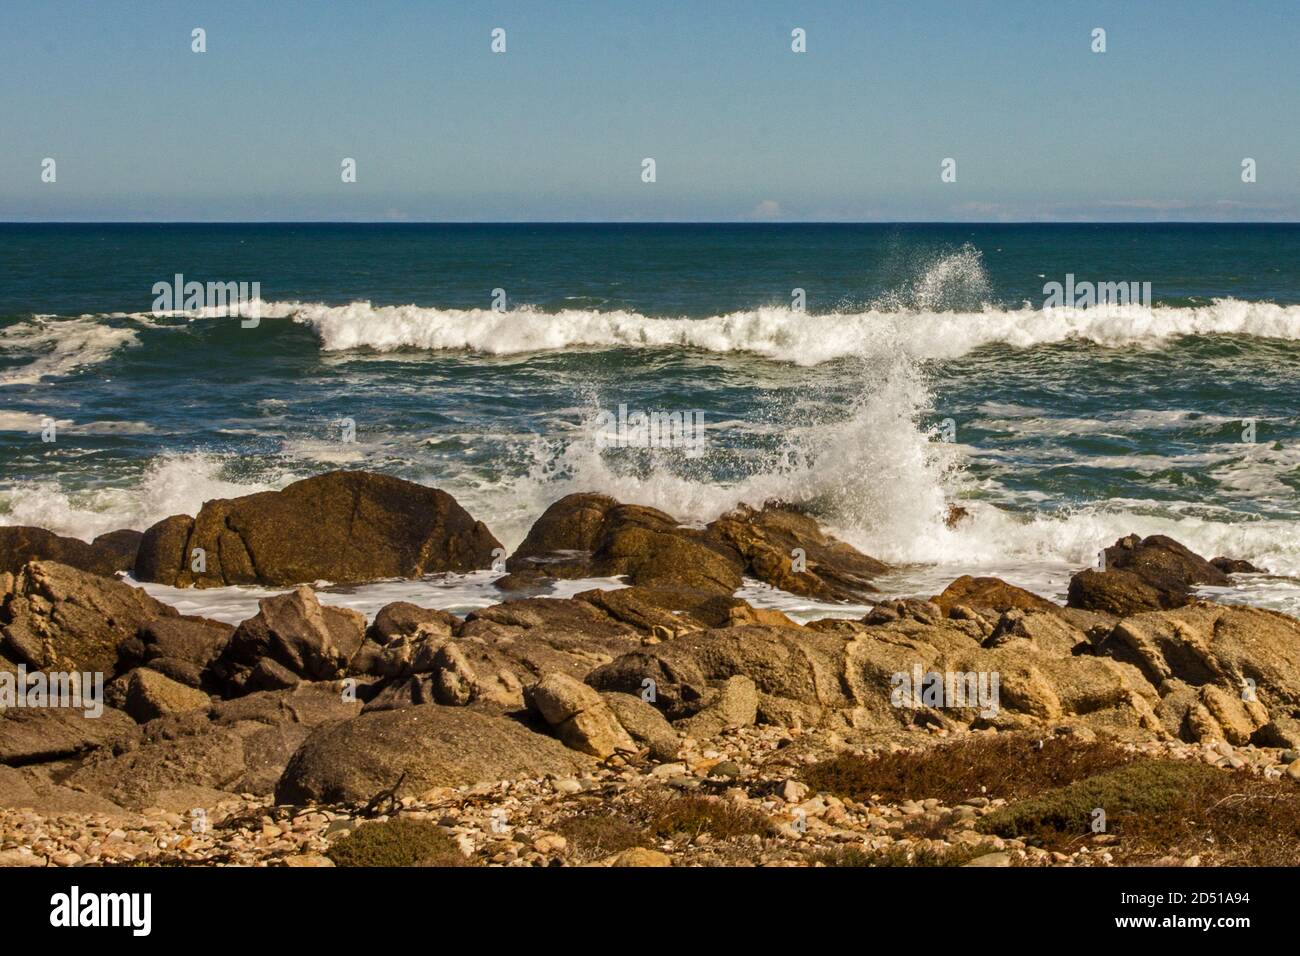 A choppy Ocean with waves crashing spectacular against the boulders on the shore of the Coastal section of the Namaqua National Park, South Africa Stock Photo